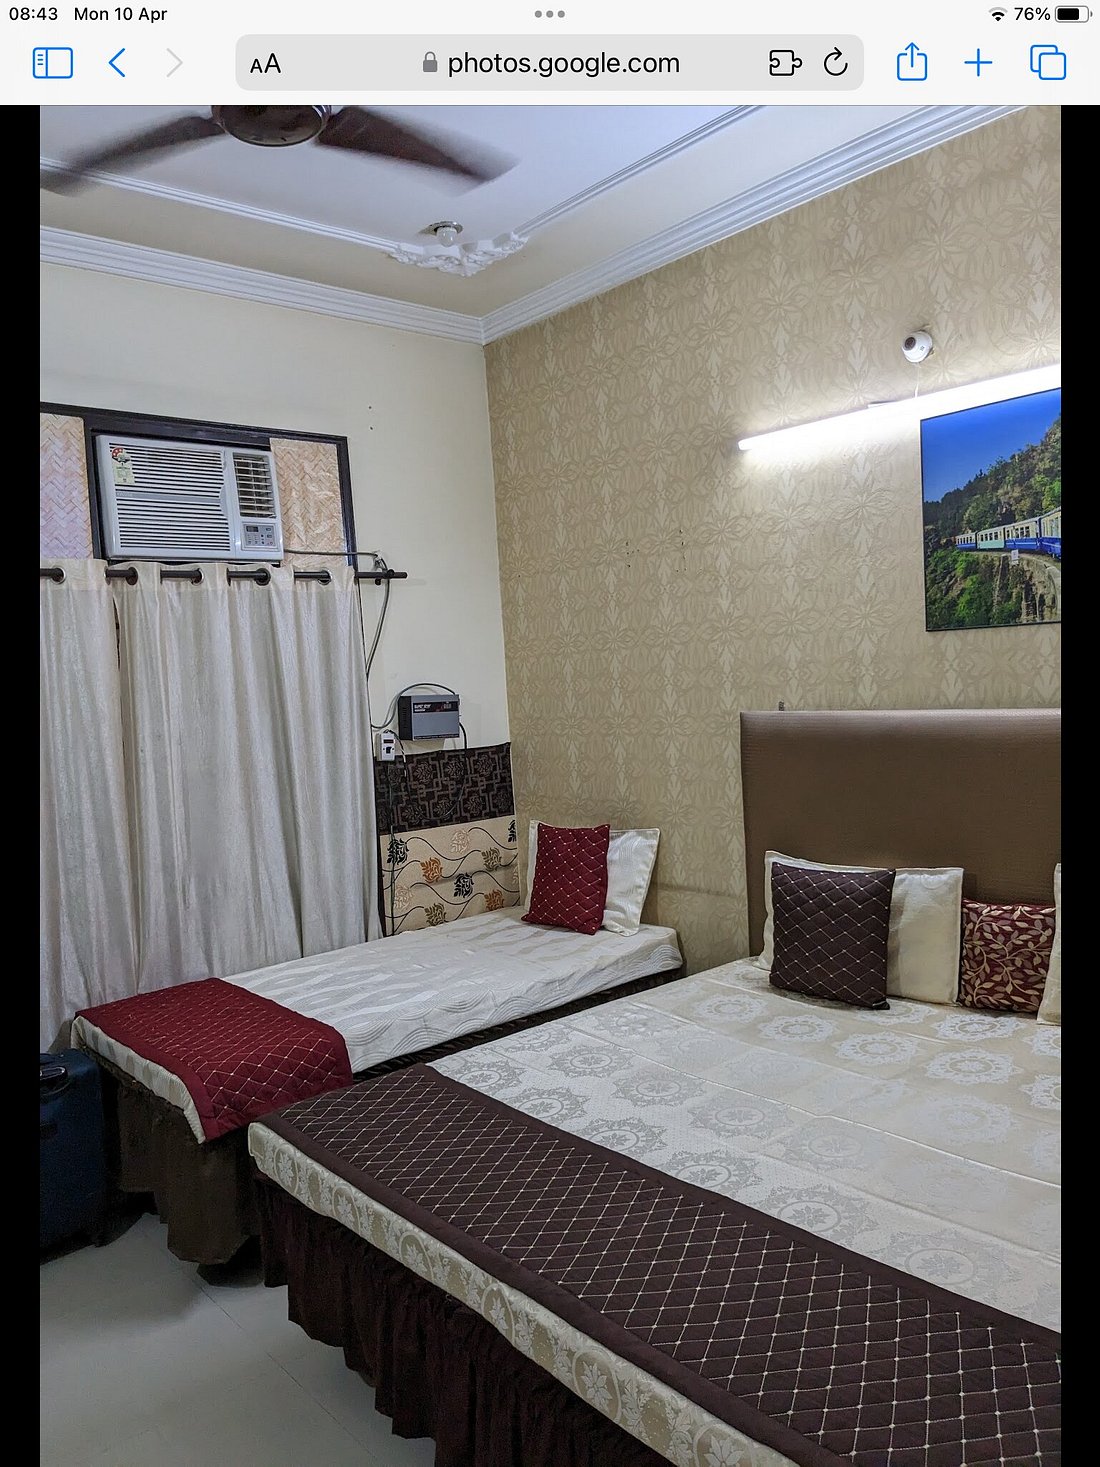 NEW CHANDIGARH HOLIDAY HOME - Guesthouse Reviews & Photos